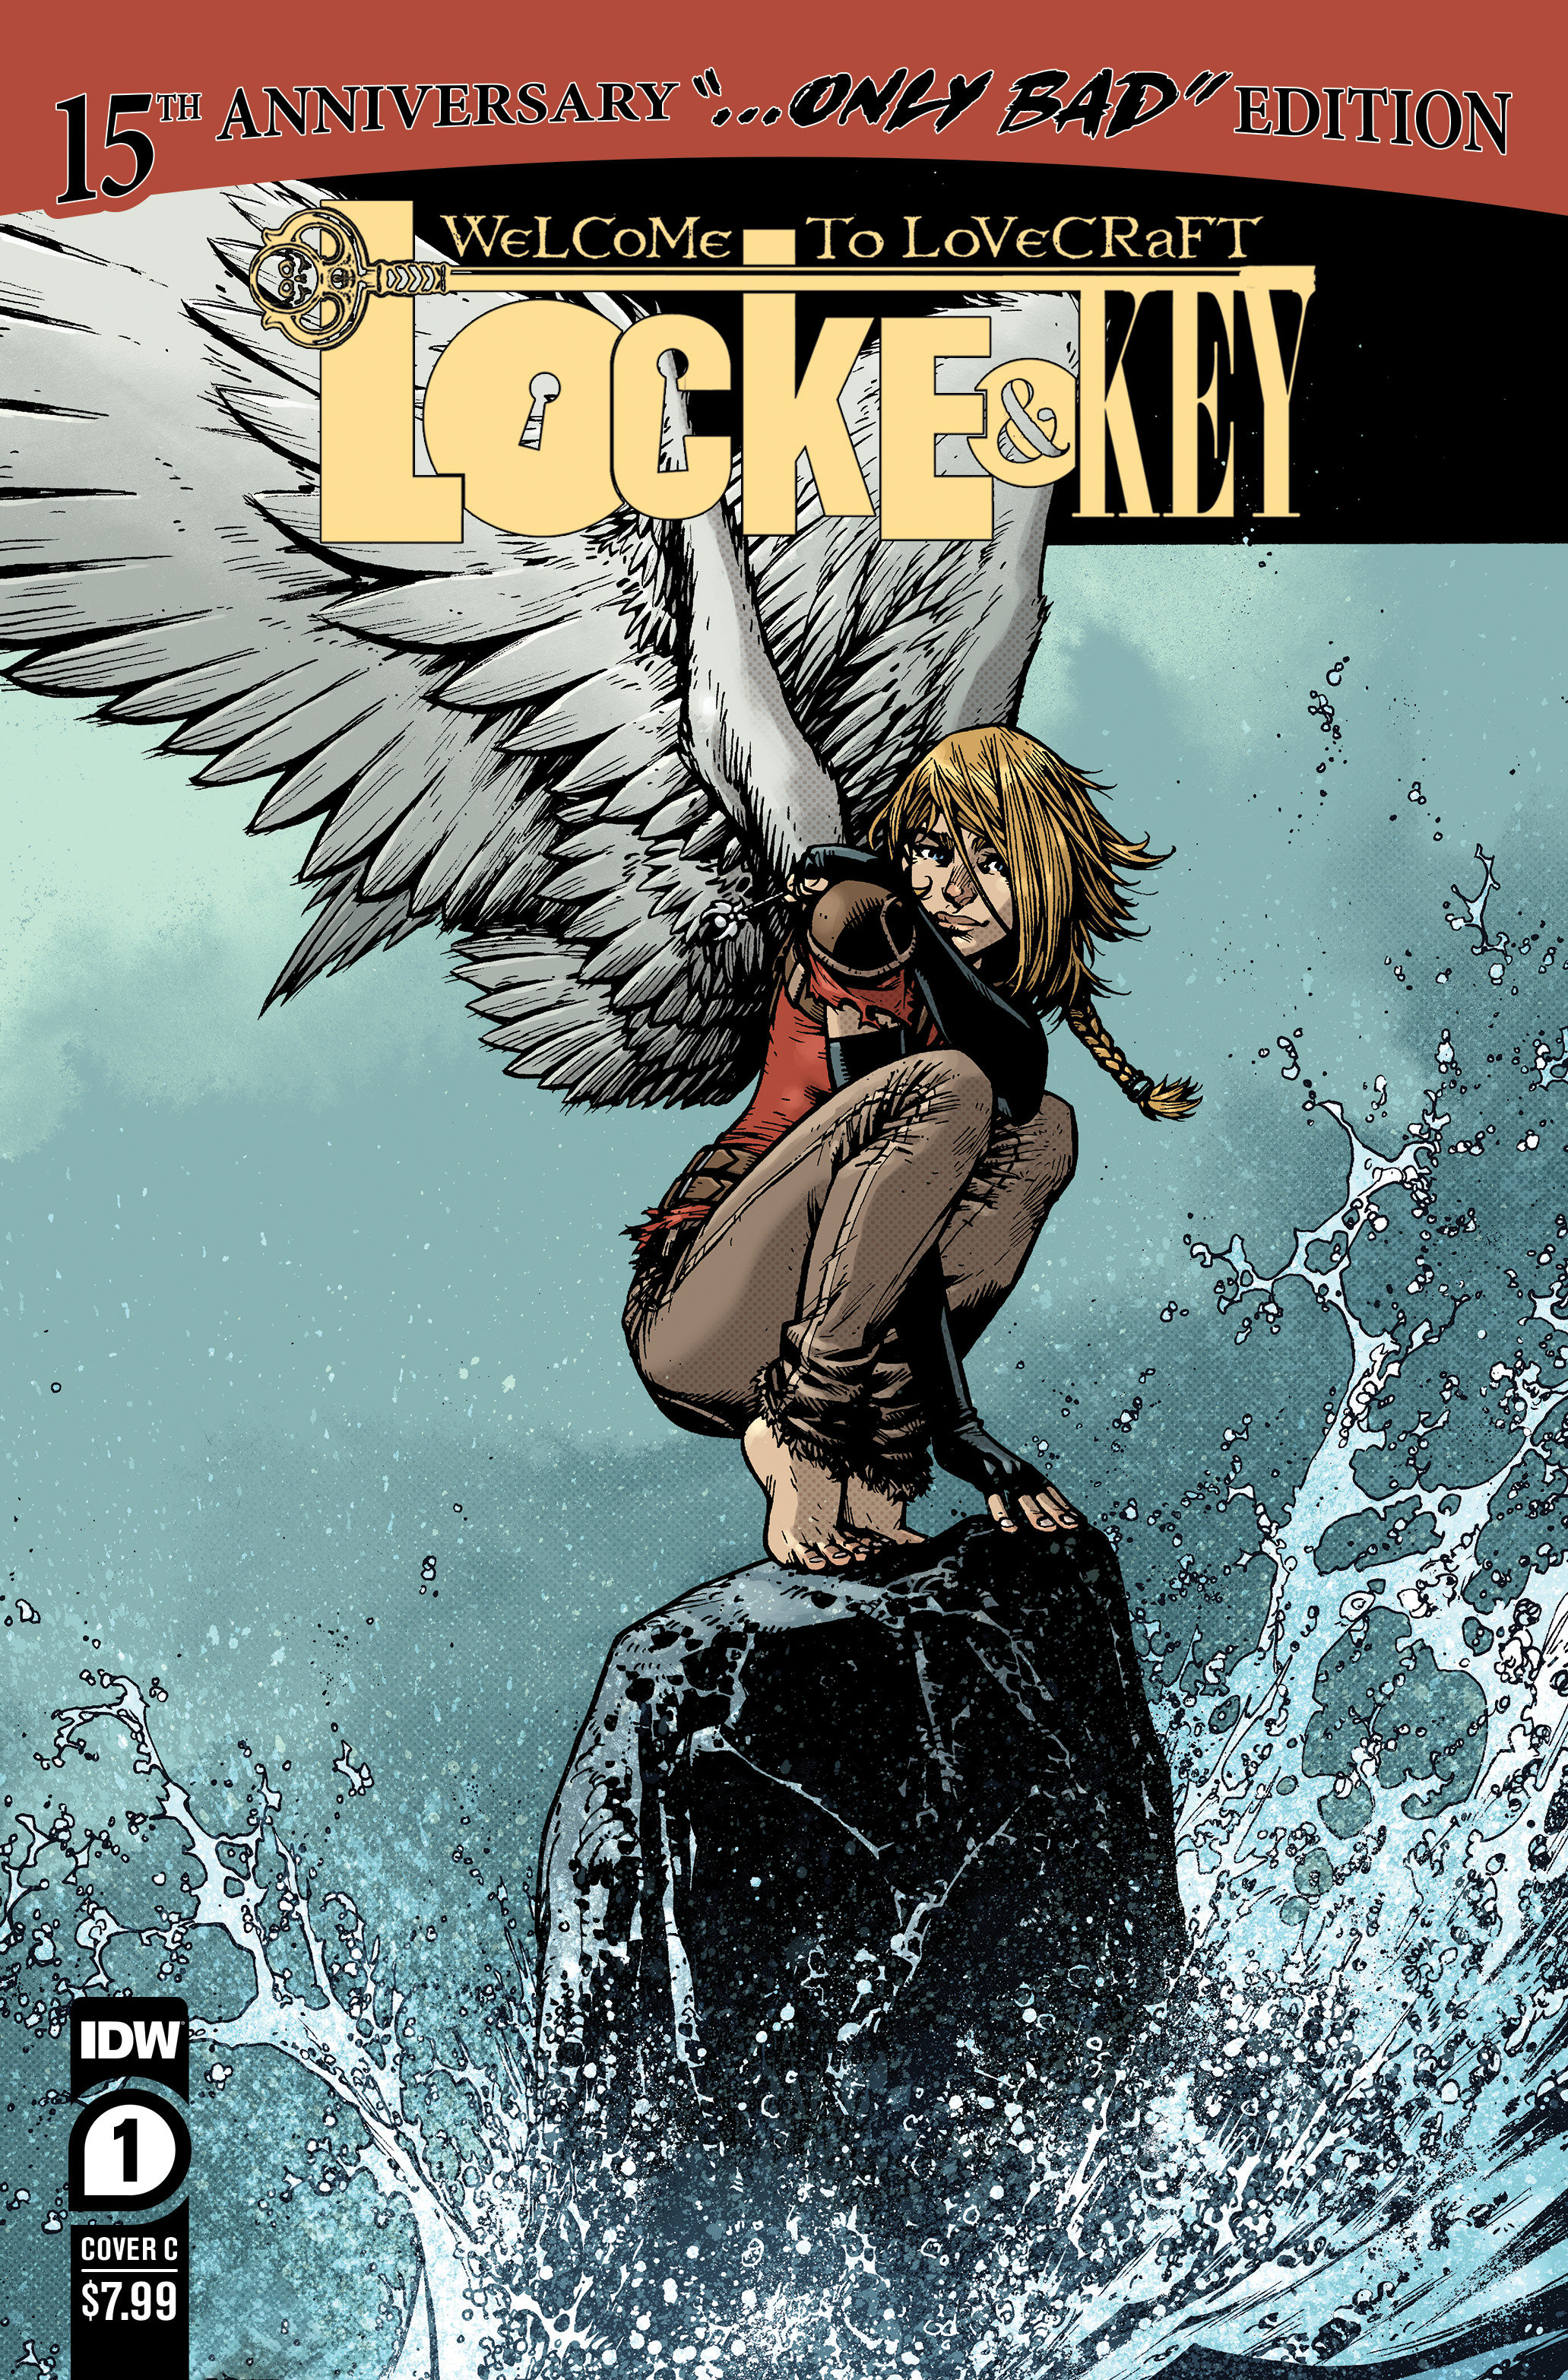 Locke & Key Welcome to Lovecraft #1 15th Anniversary Edition Cover C Howard